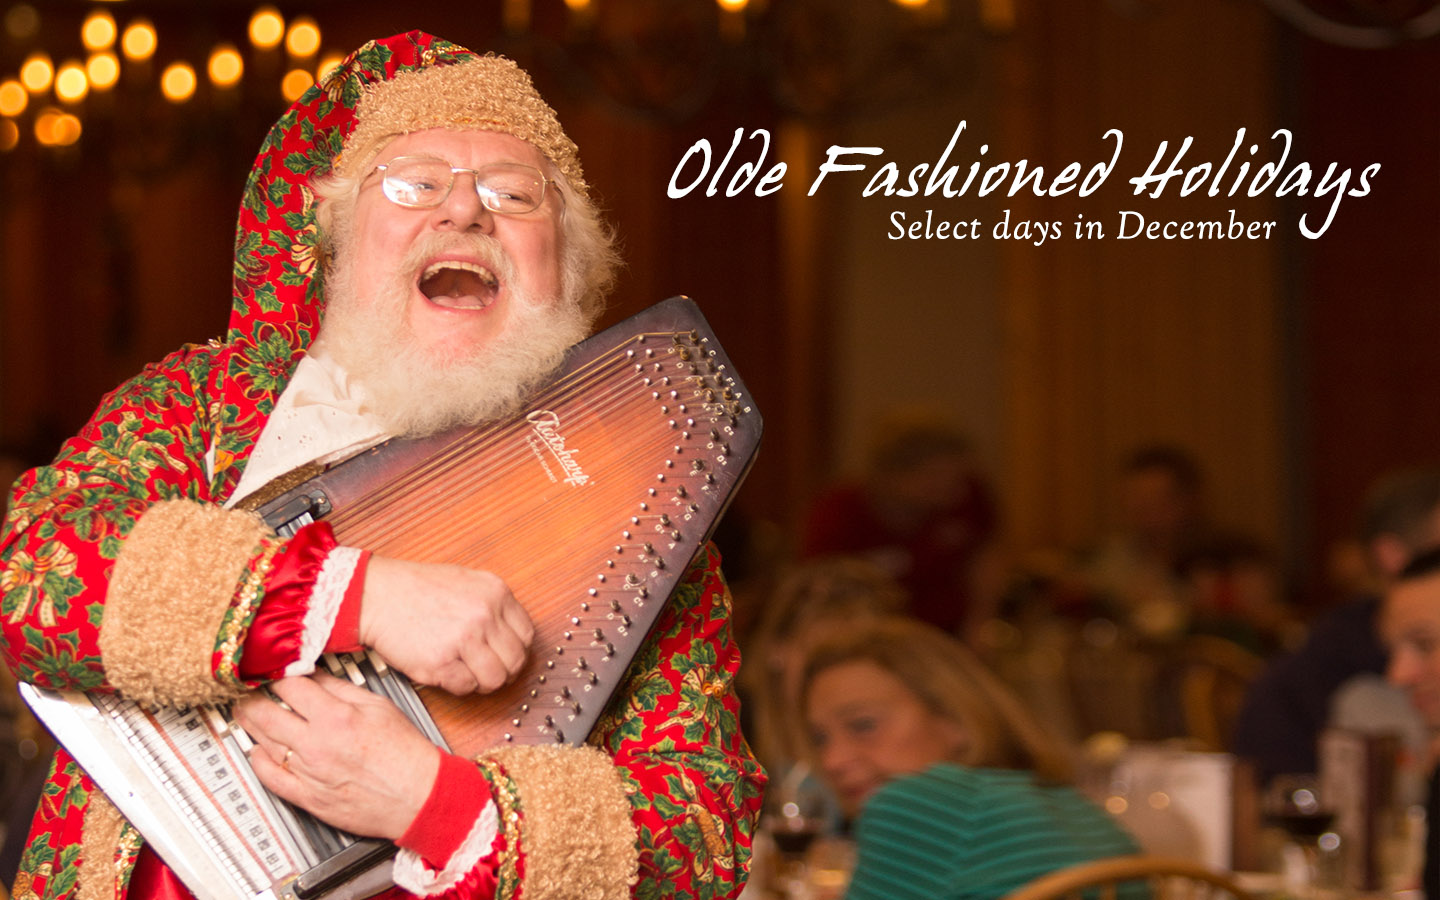 Santa Claus playing an autoharp. Text: Olde Fashioned Holidays, select days in December.